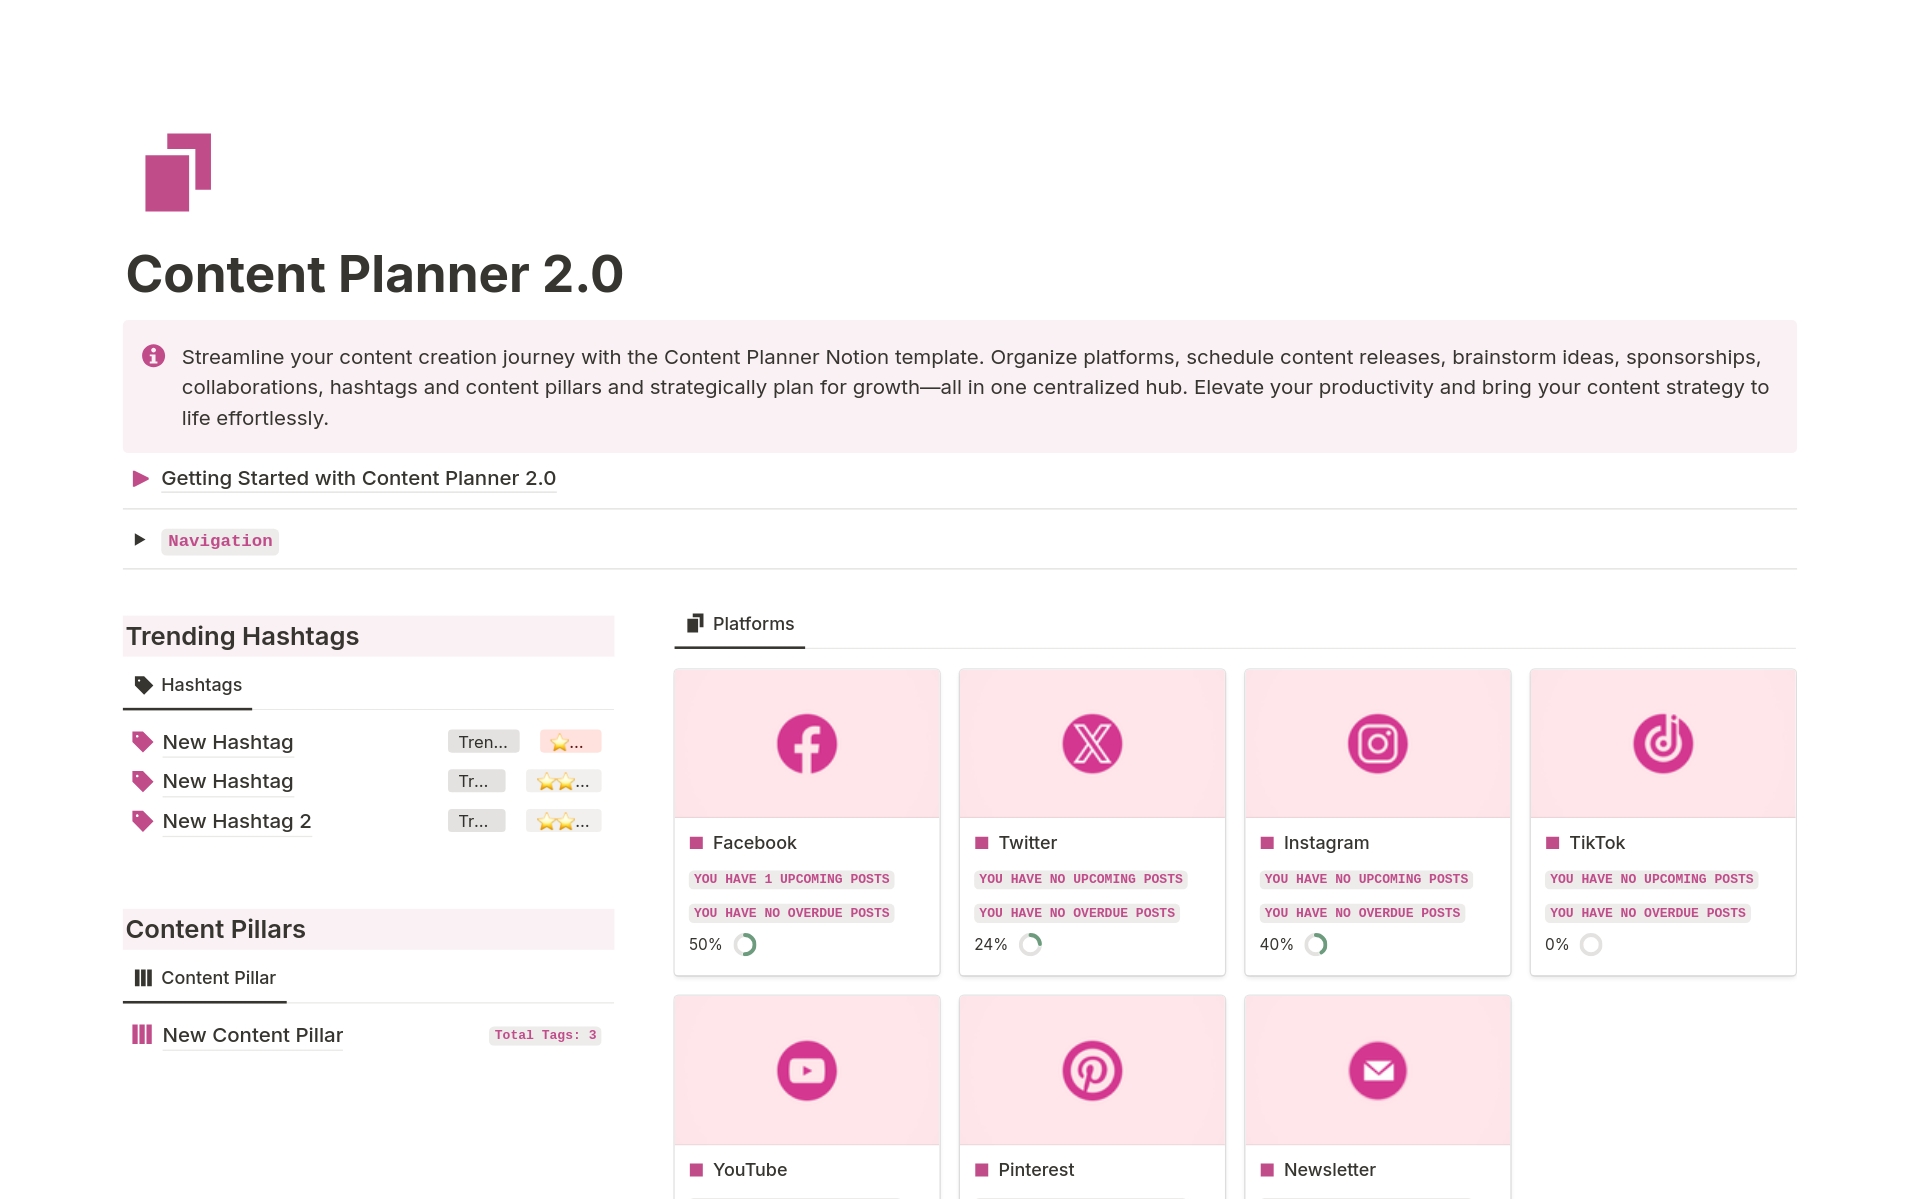 Streamline your content creation journey with the Content Planner Notion template. Organize platforms, schedule content releases, brainstorm ideas, sponsorships, collaborations, hashtags and content pillars and strategically plan for growth—all in one centralized hub. 